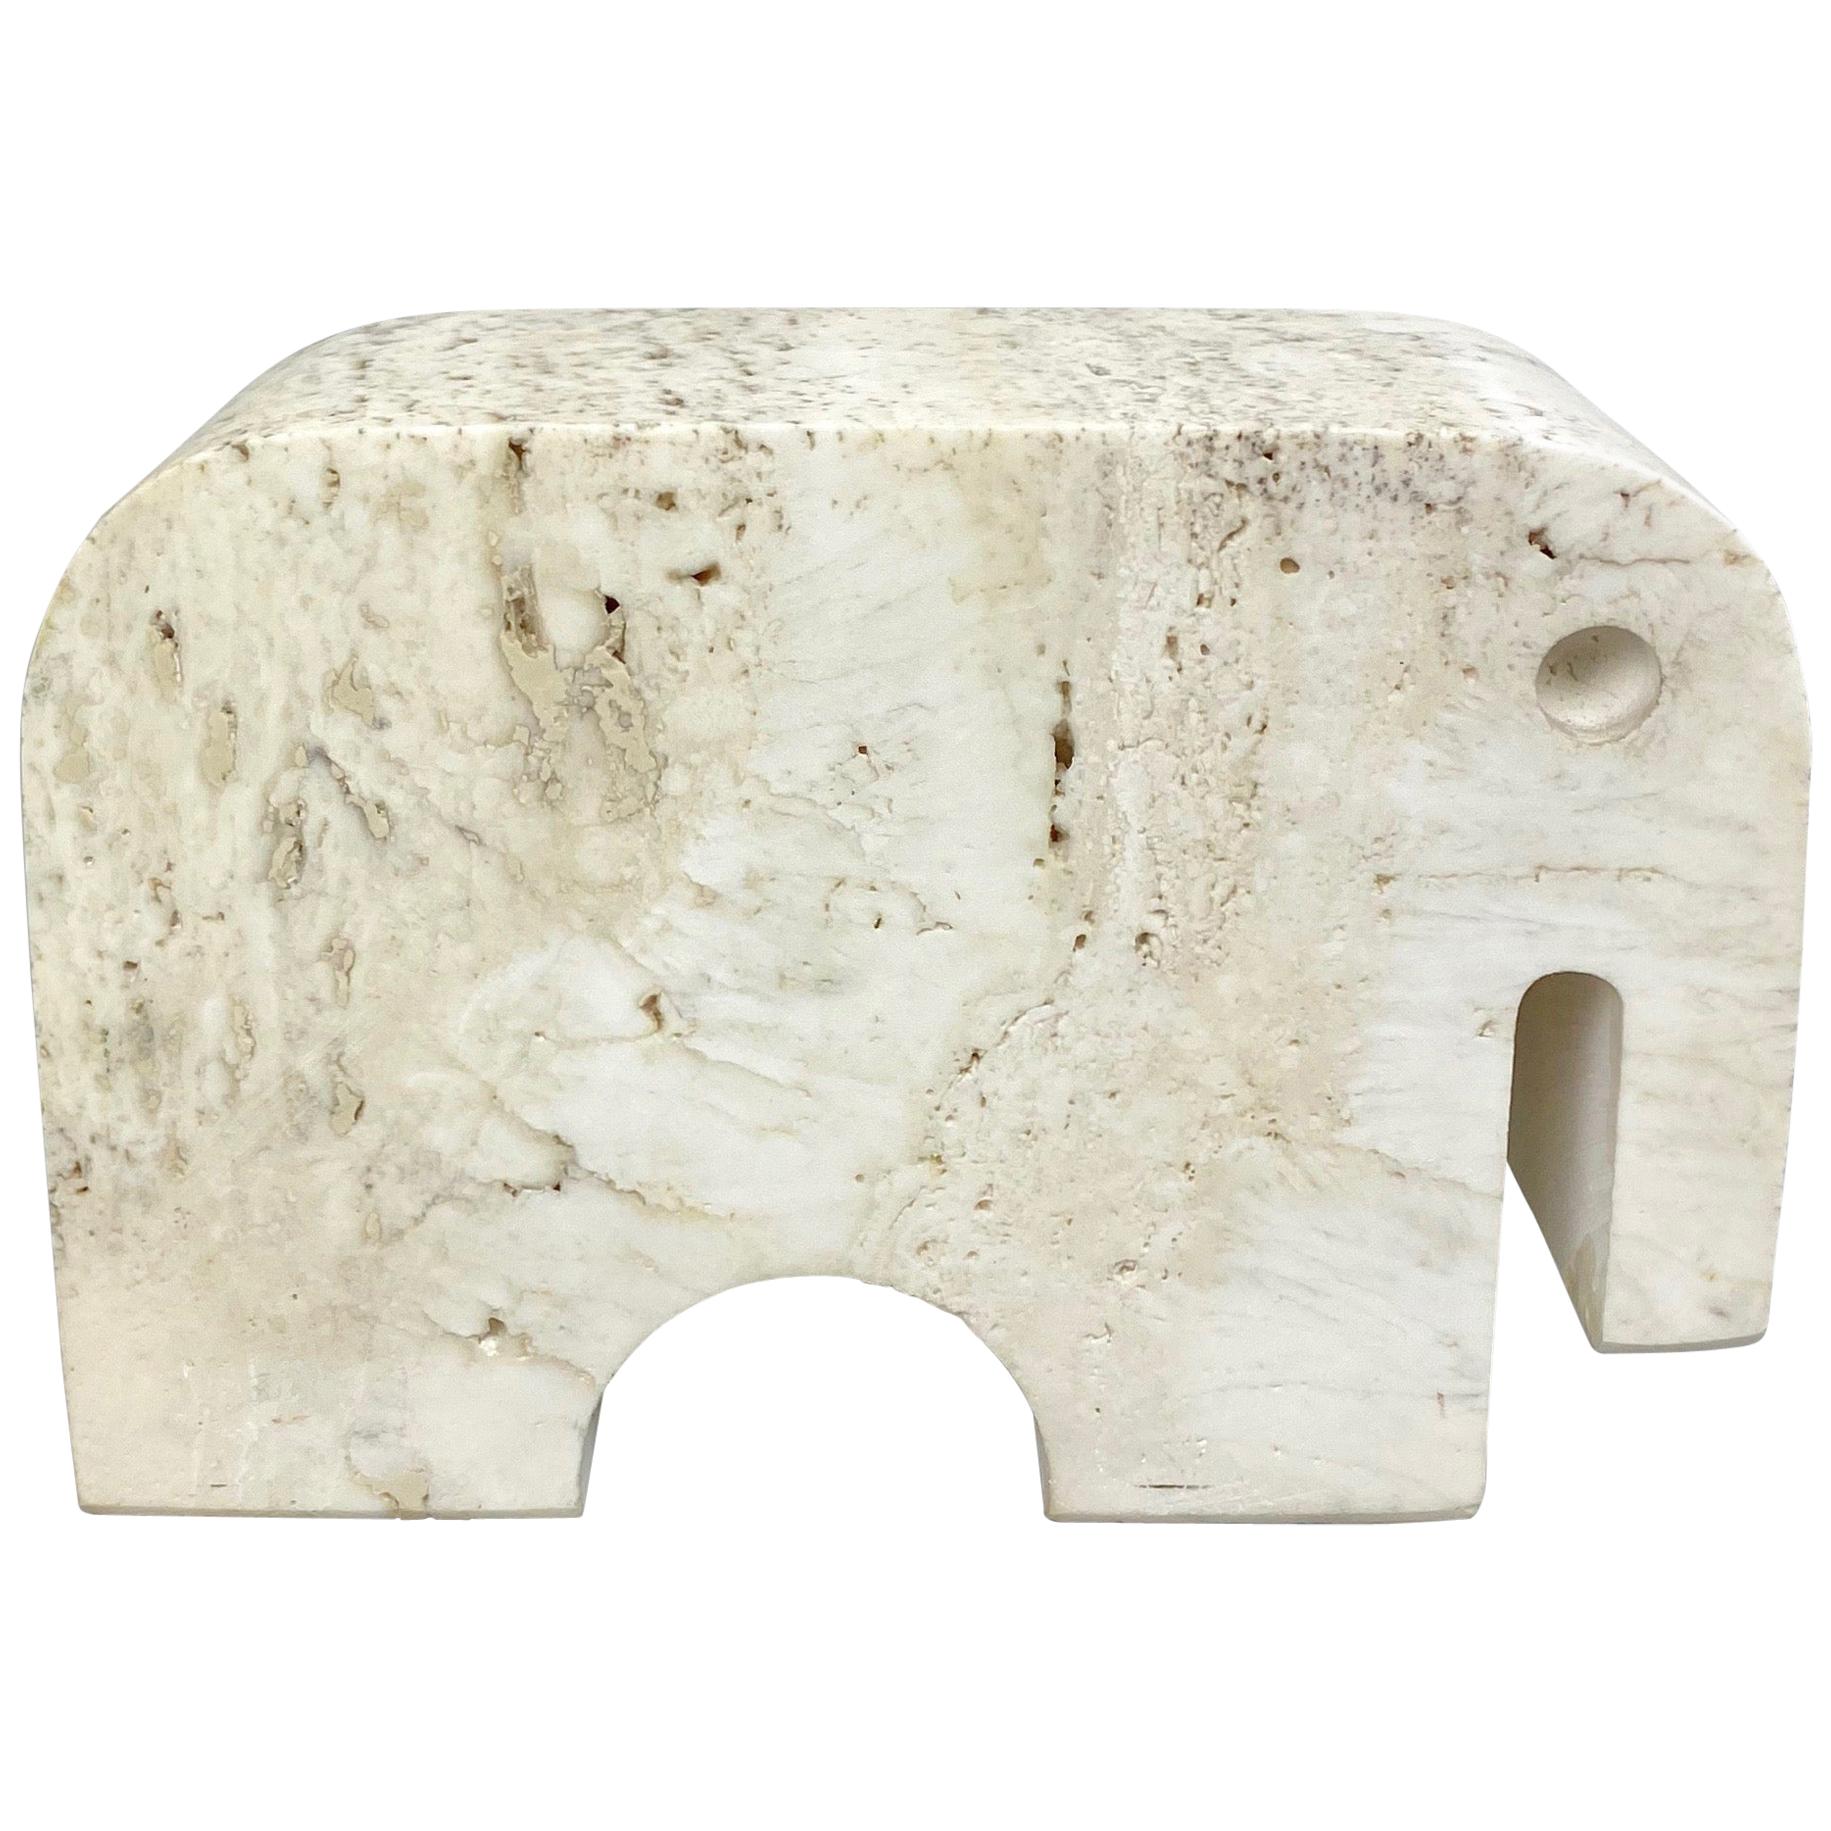 Fratelli Mannelli Travertine Elephant Sculpture Paperweights, Italy, 1970s